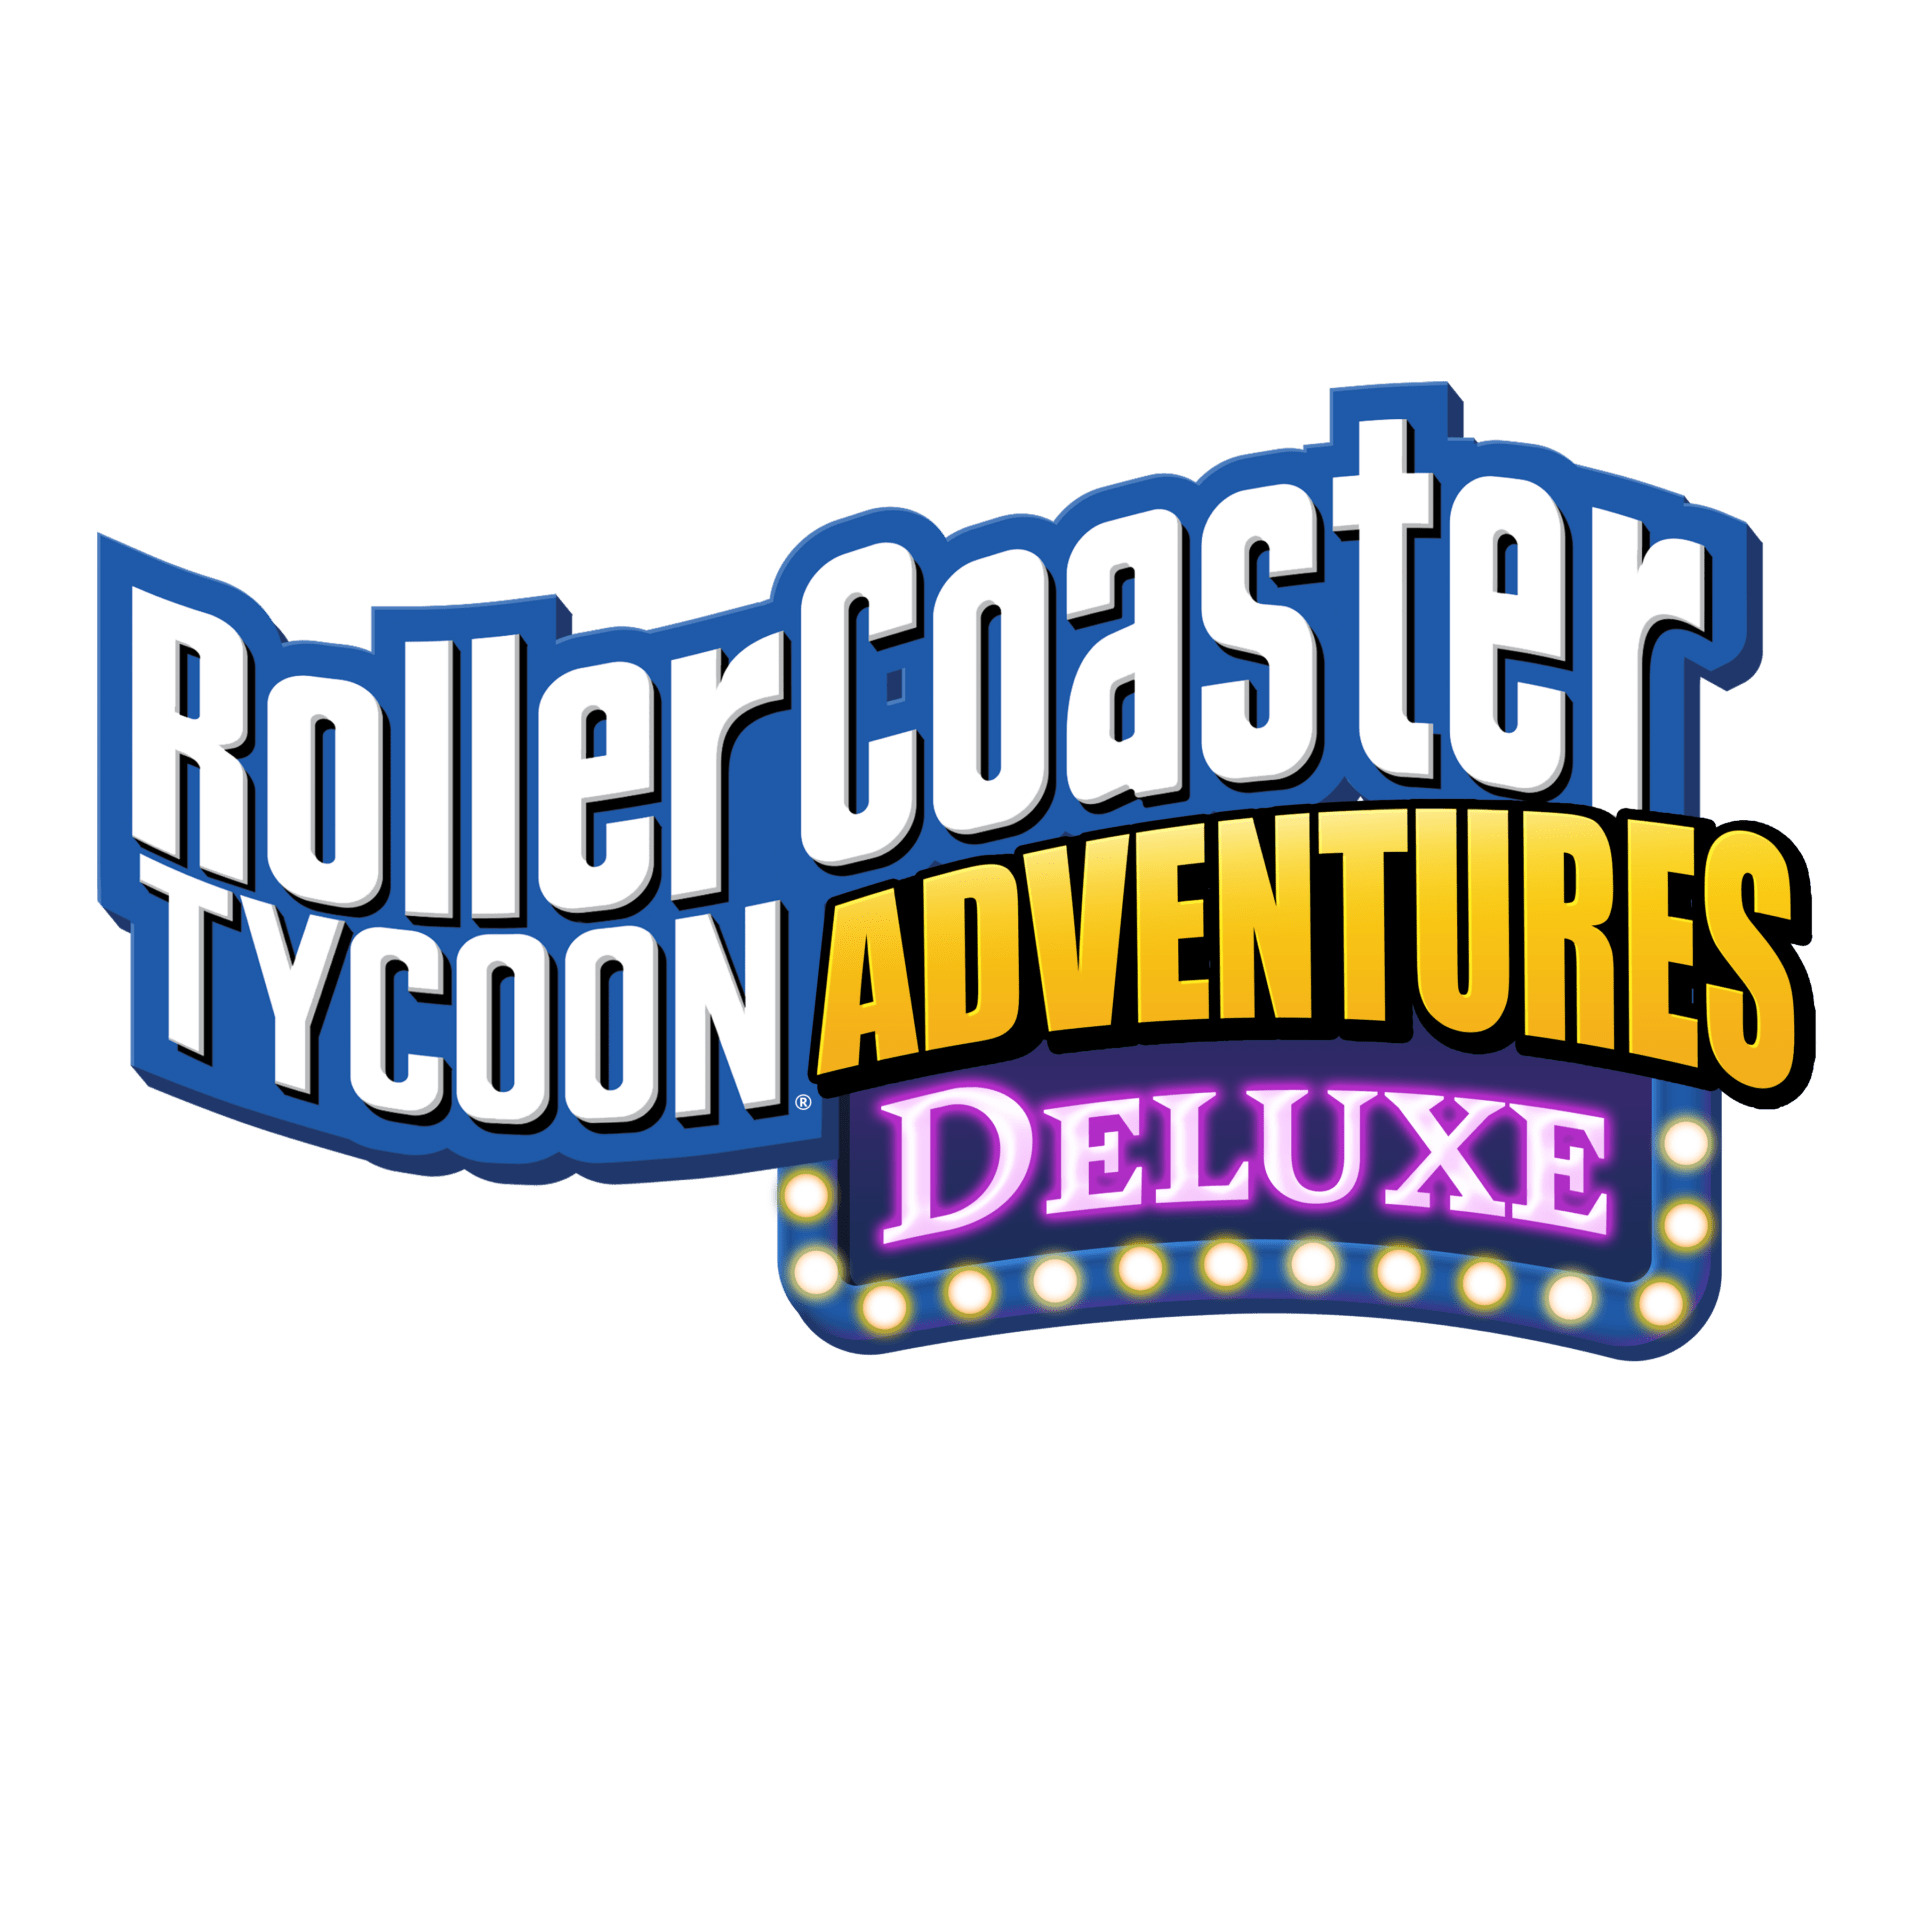 RollerCoaster Tycoon Adventures - RollerCoaster Tycoon - The